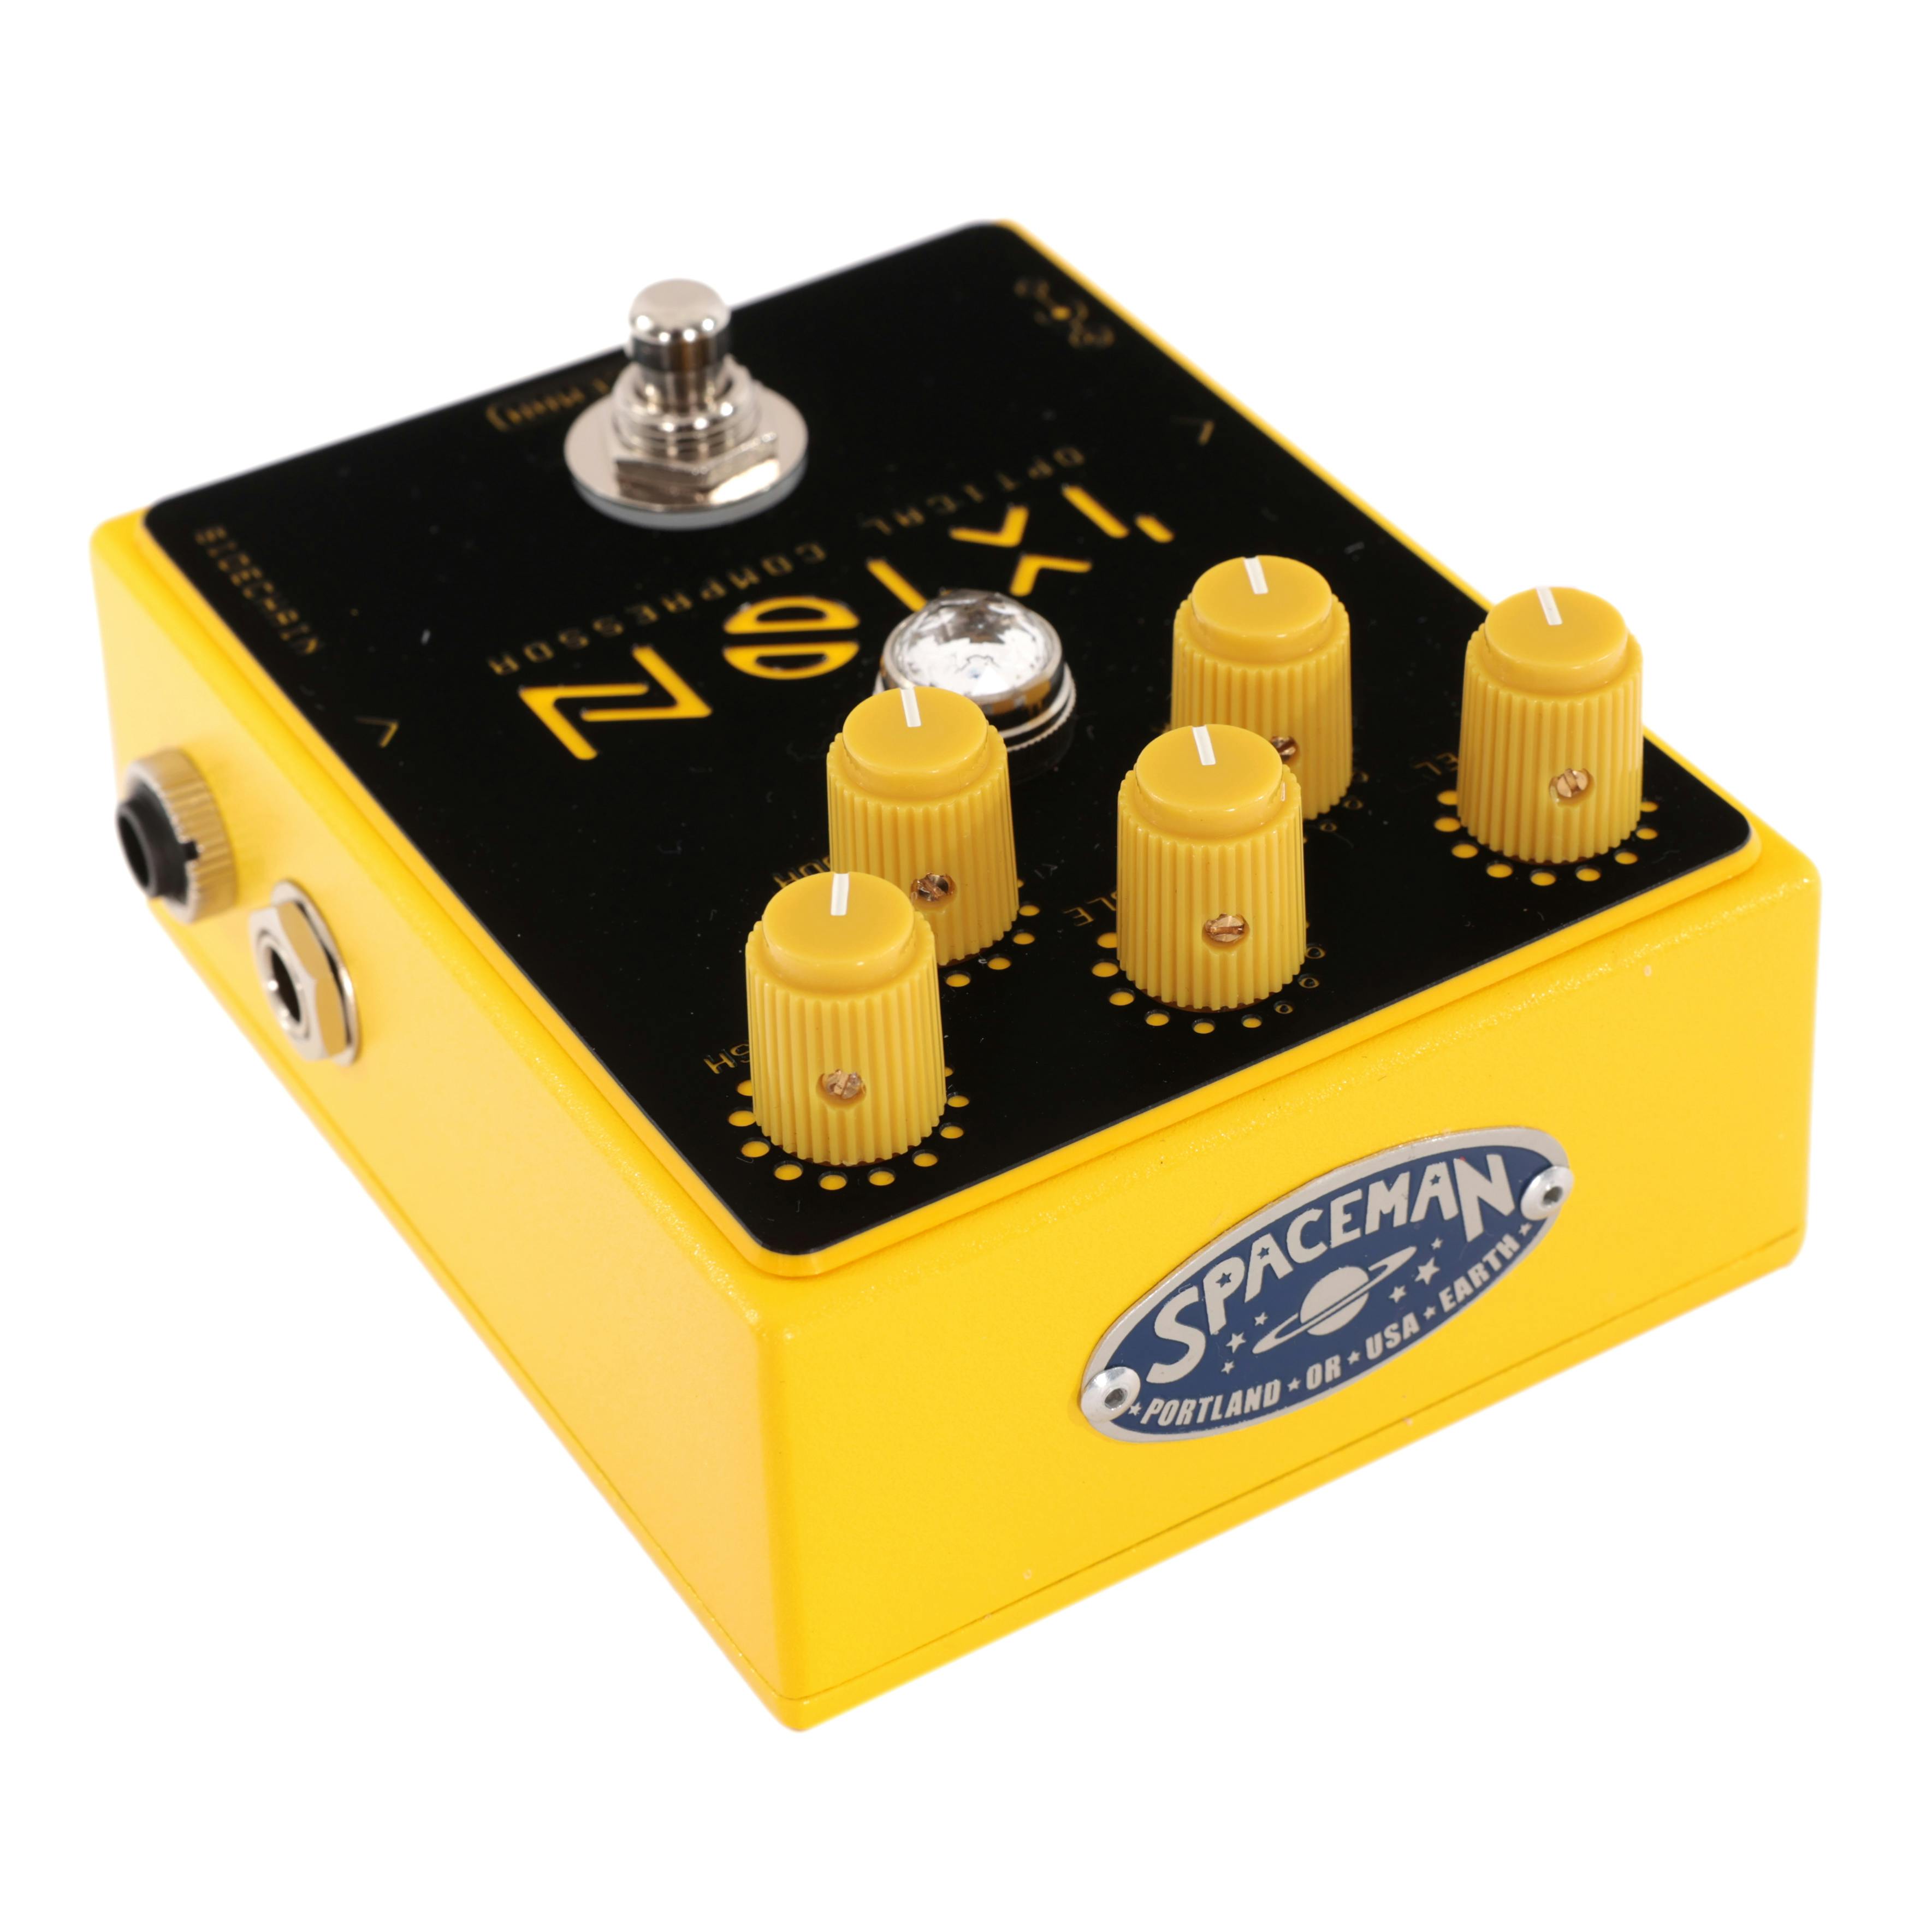 Spaceman Ixion optical compressor yellow - The Sound Parcel